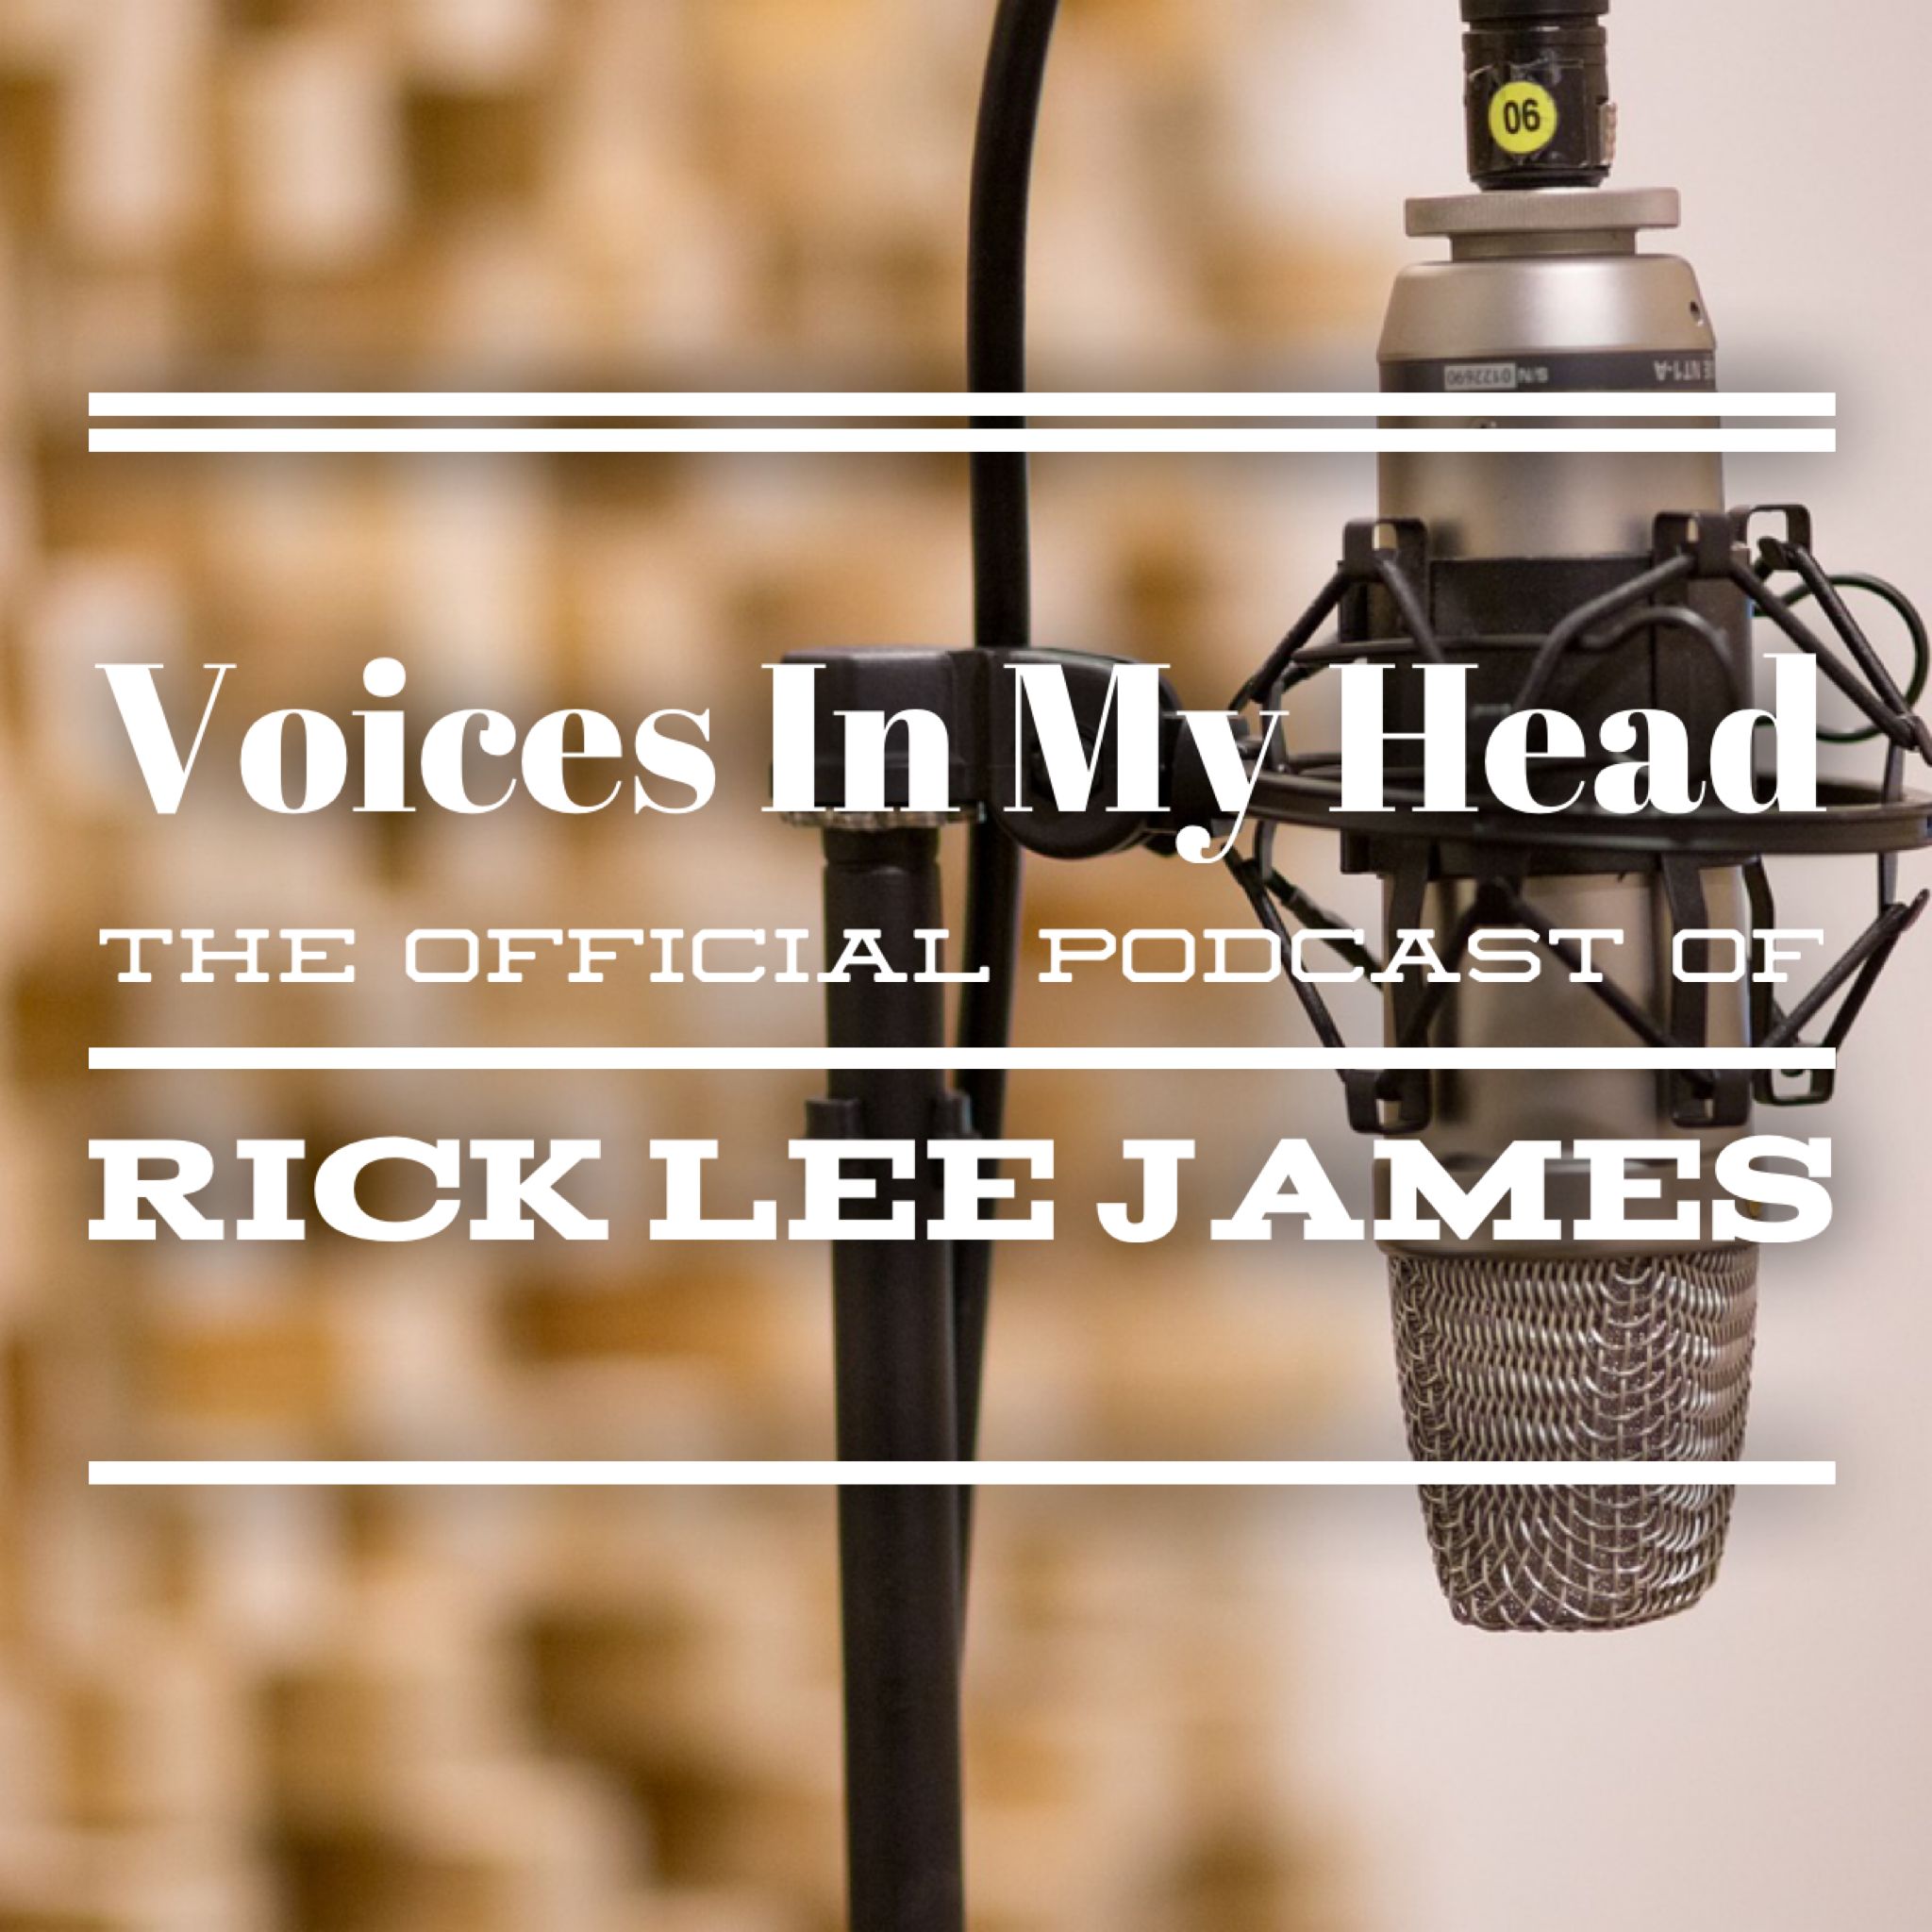 Voices In My Head Podcast Episode #275: A History of Christian Worship Part Four - The 4th through 8th Centuries